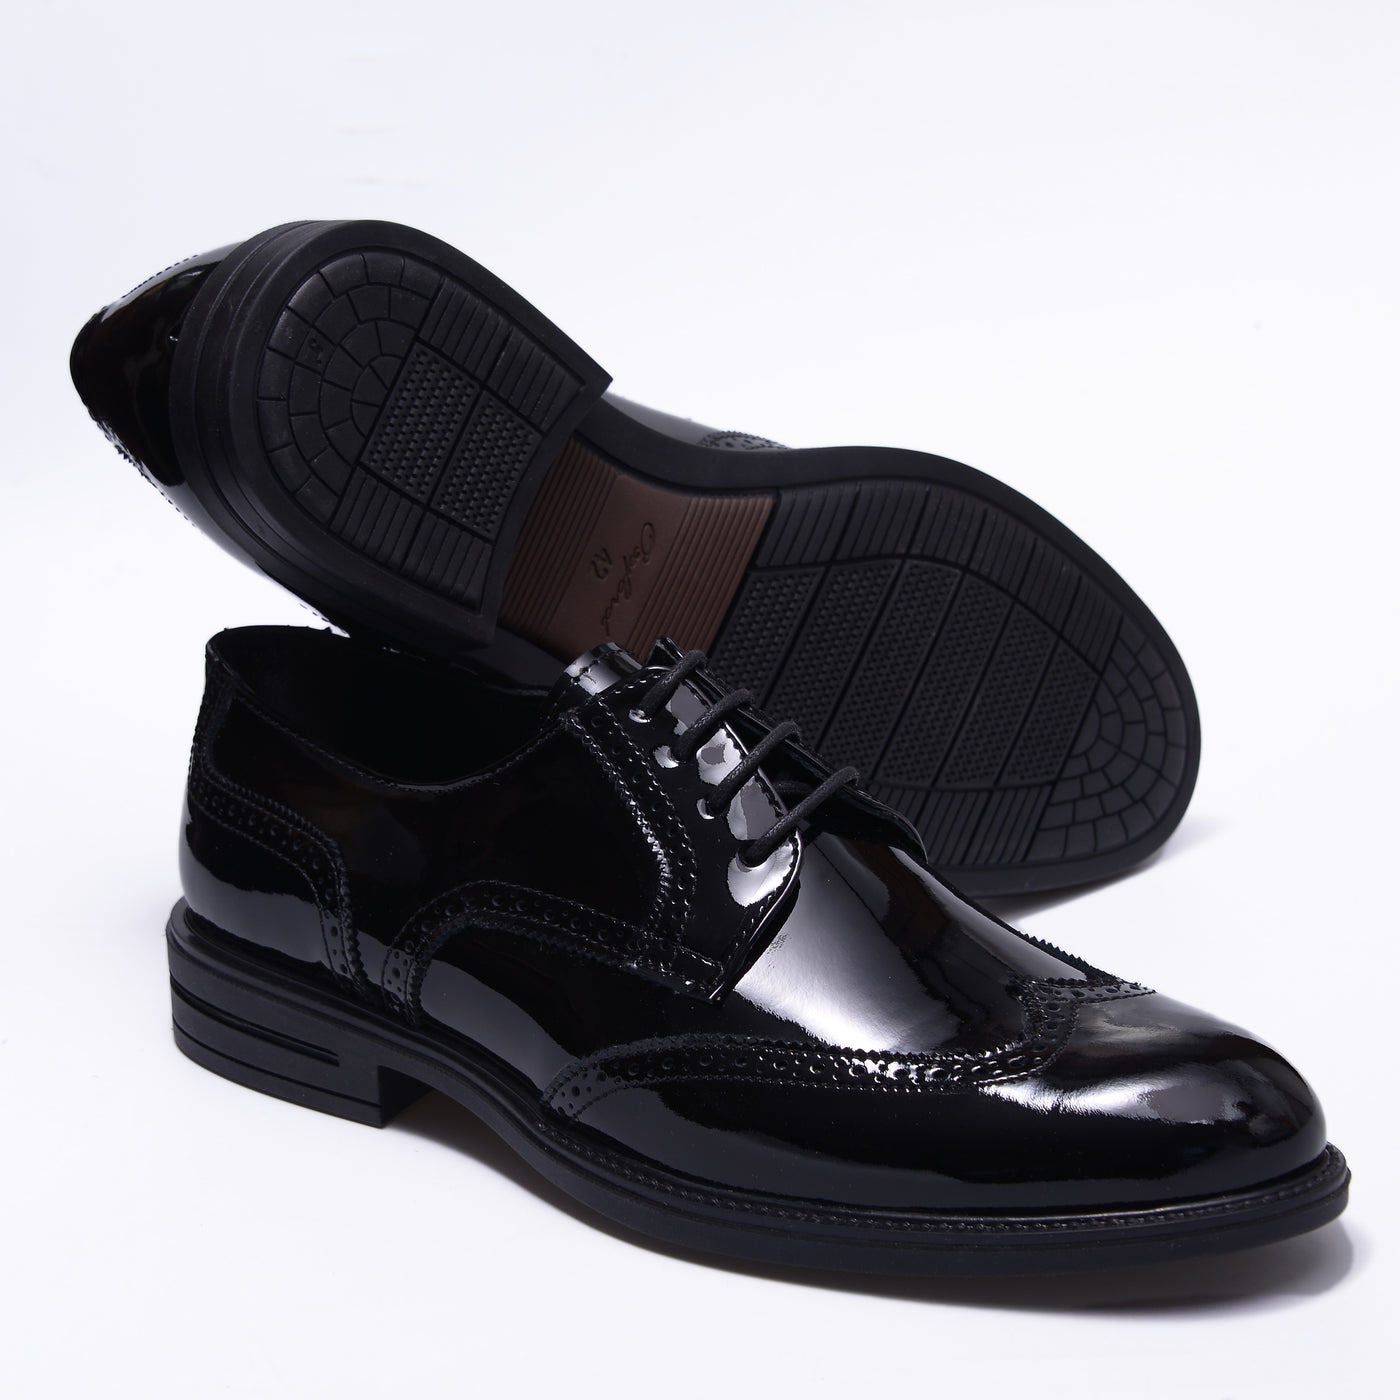 Ashour's Shiny Leather Oxford Shoes For Men (Signature Collection)